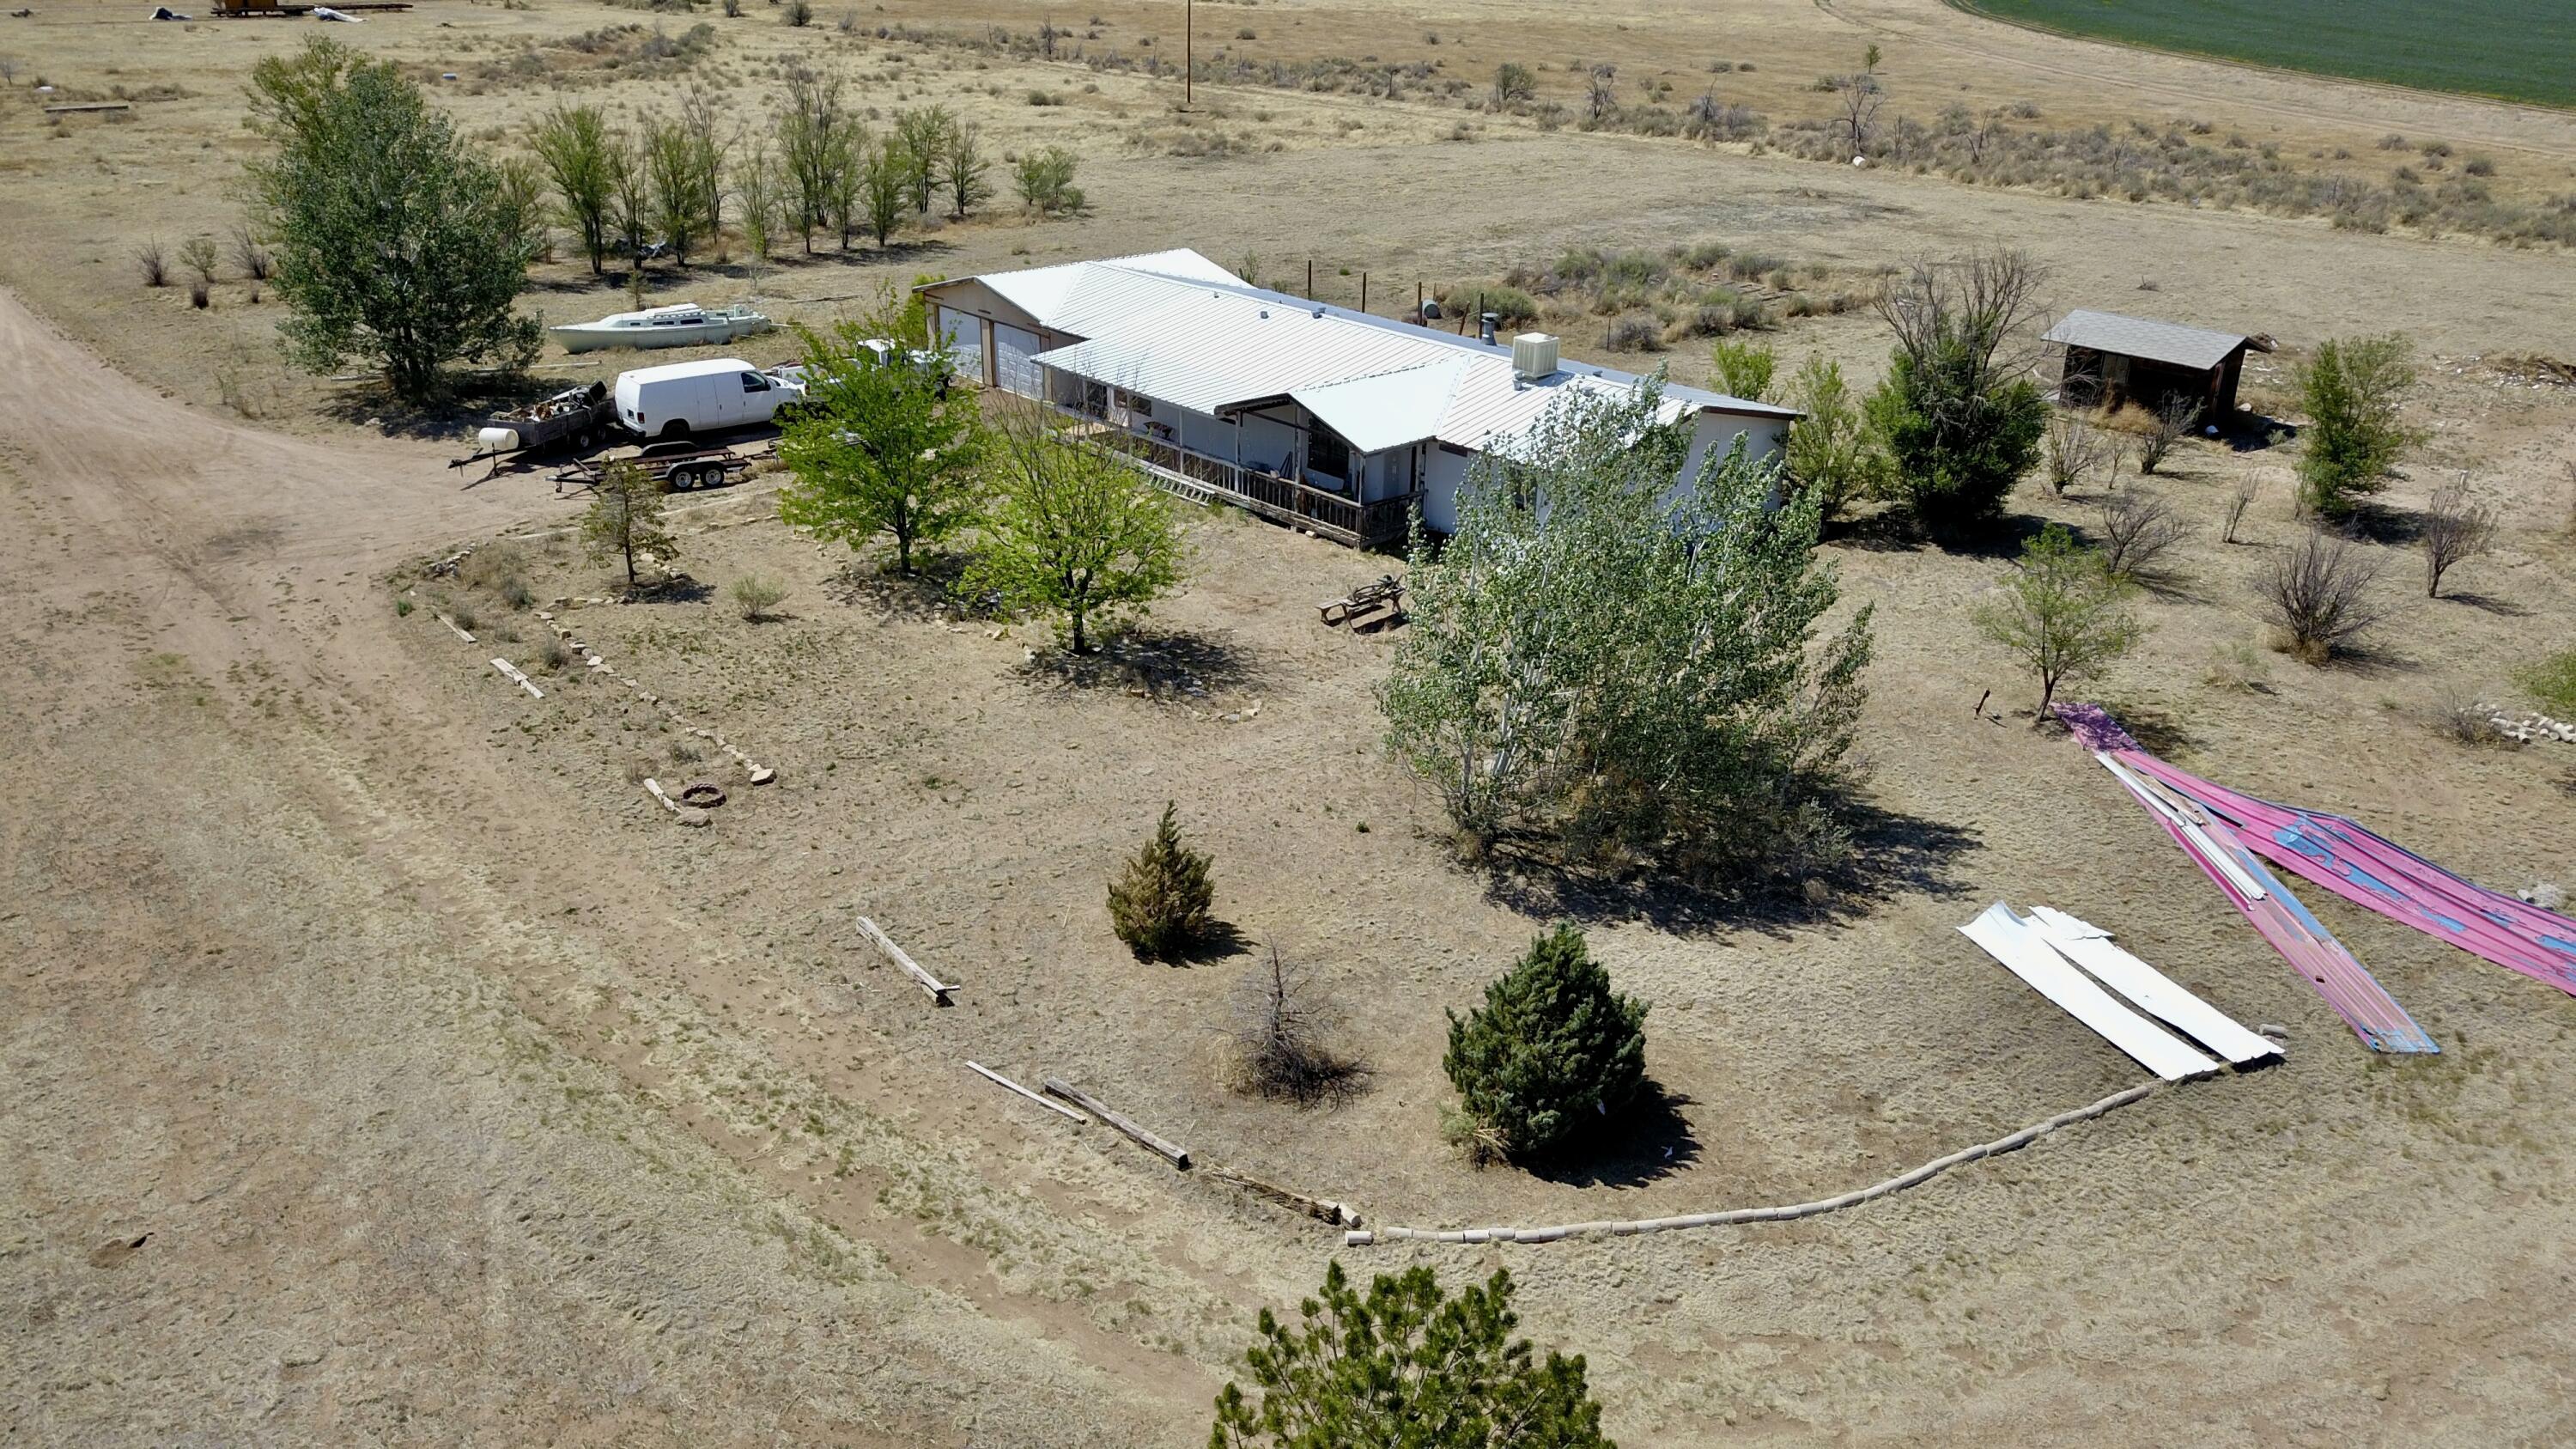 2 lots, 1 is 17.5 acres, and 1 is 2.5 acres. zoned commercial. Agricultural Preservation. Huge Metal shop (50X70) 10 foot walls and about 14 foot ceiling with electricity (includes 220) and wood burning stove. There is an irrigation well next to it (needs pump). Another 22x23 garage with 220 near that one. The house is a ground set 1995 doublewide mobile home with an attached mud room and another oversized 2 car garage. It needs some work, but definitely has potential. Flooring is already ripped out, and the laminate is there for someone to lay. needs some paint, baseboards, and some work in the master bath.  The kitchen has lots of cabinets and counter space. Walk-in pantry. Brand new well to the house.  Beautiful views with a large herd of Antelope living near by. zoned commercial,